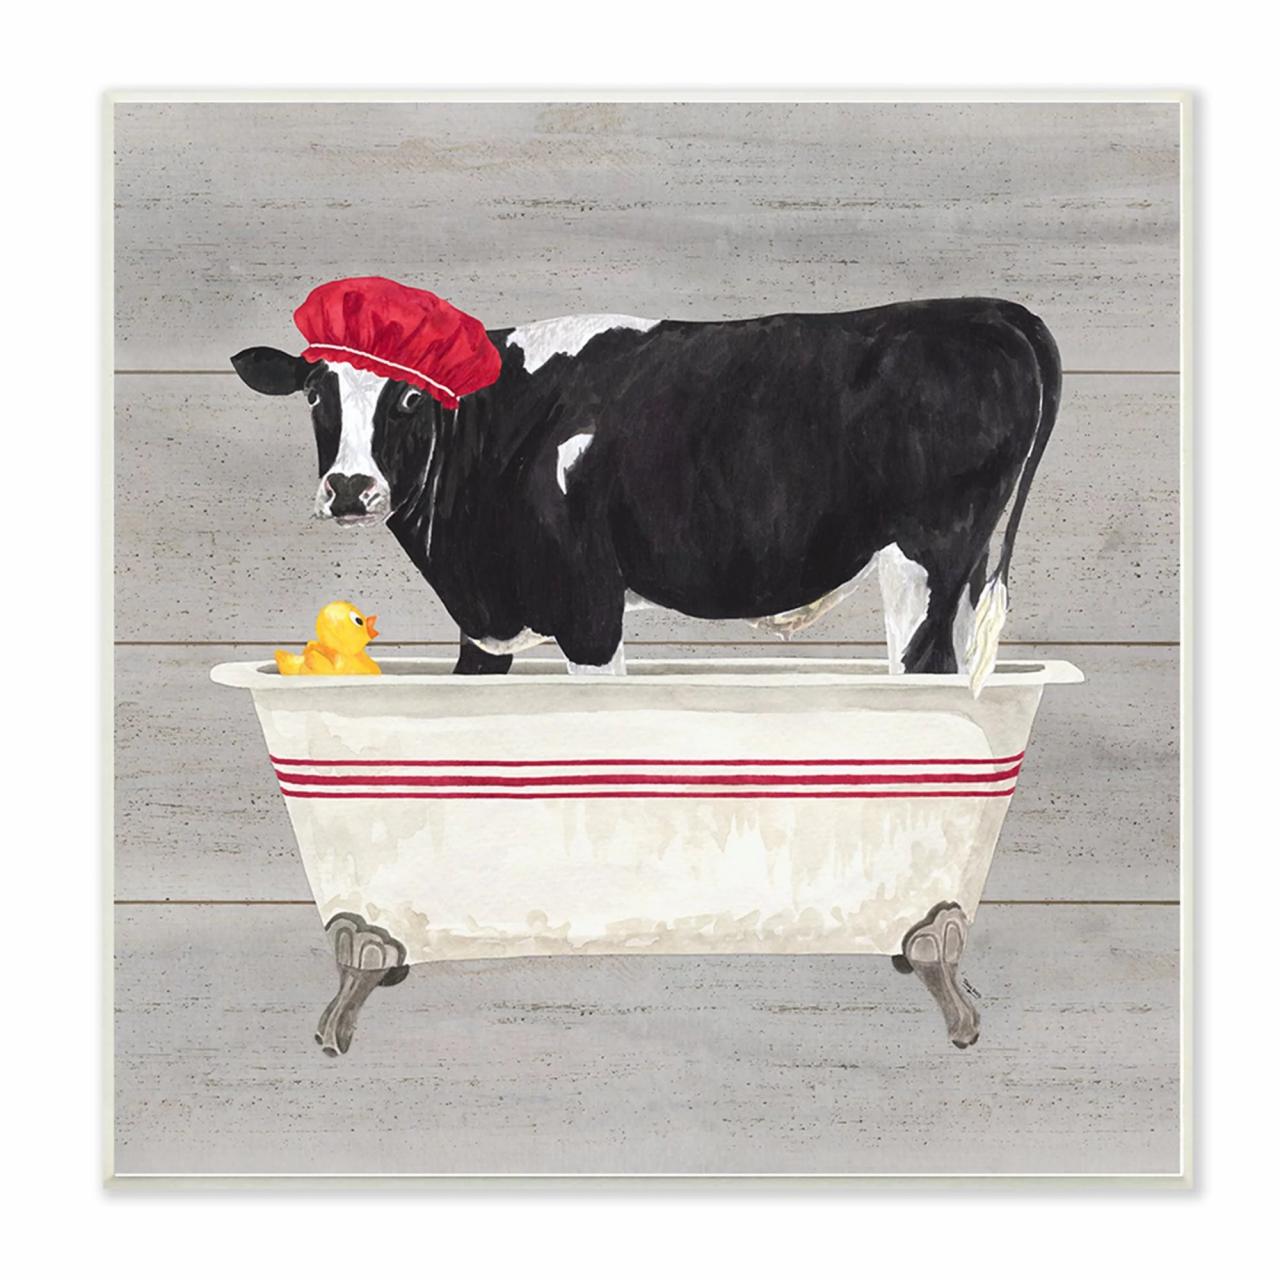 The Stupell Home Decor Collection Bath Time For Cows at Tub Red Black